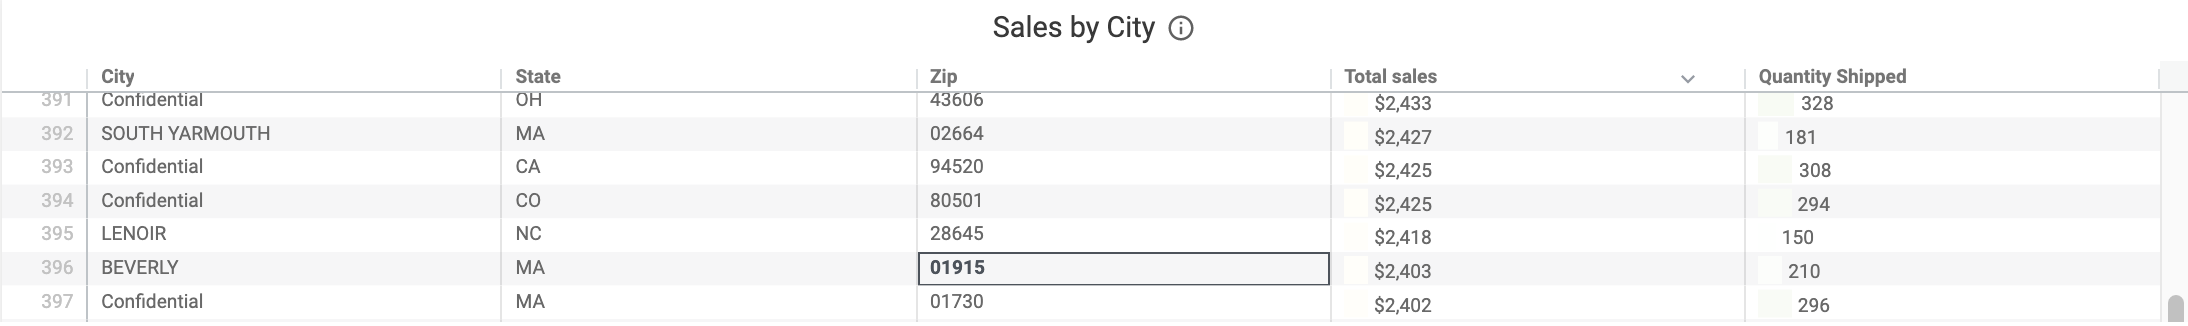 Sales_by_City_Filter.png